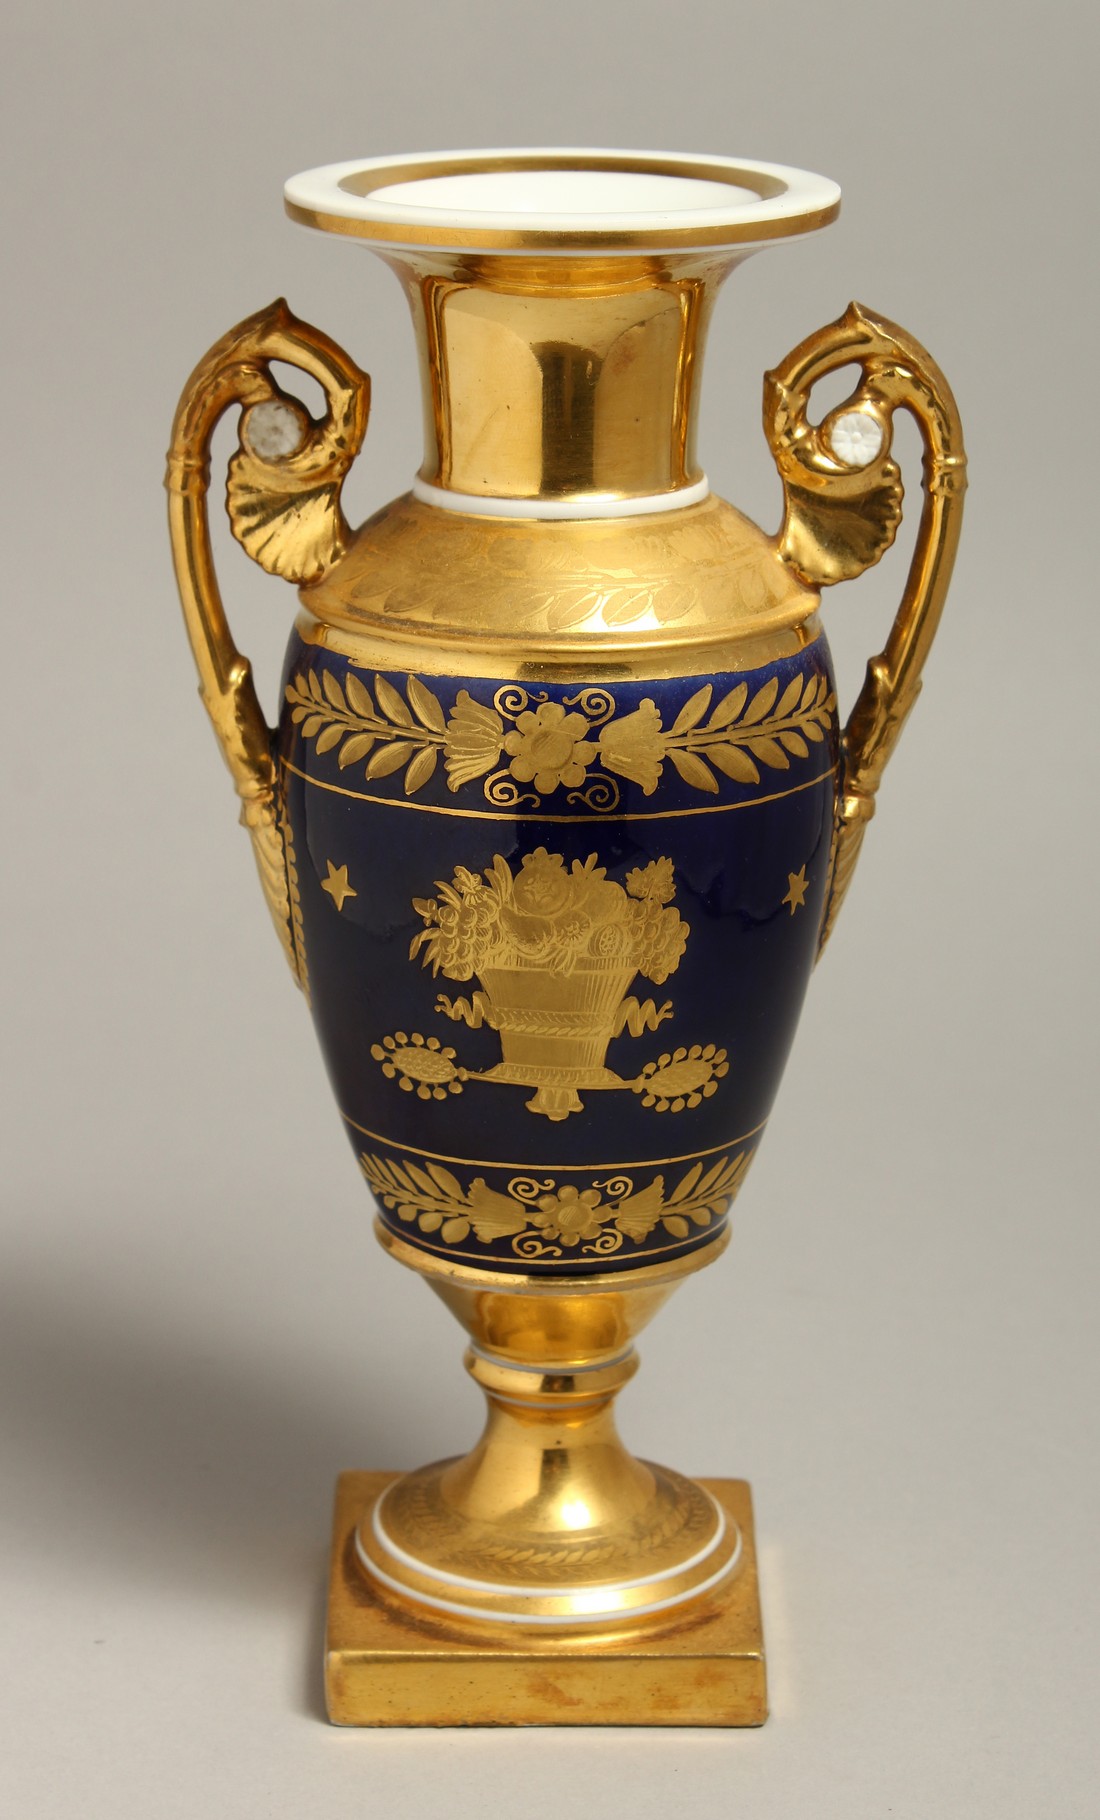 A 19TH CENTURY PARIS PORCELAIN TWO HANDLED VASE having a cobalt blue ground with etched gilded